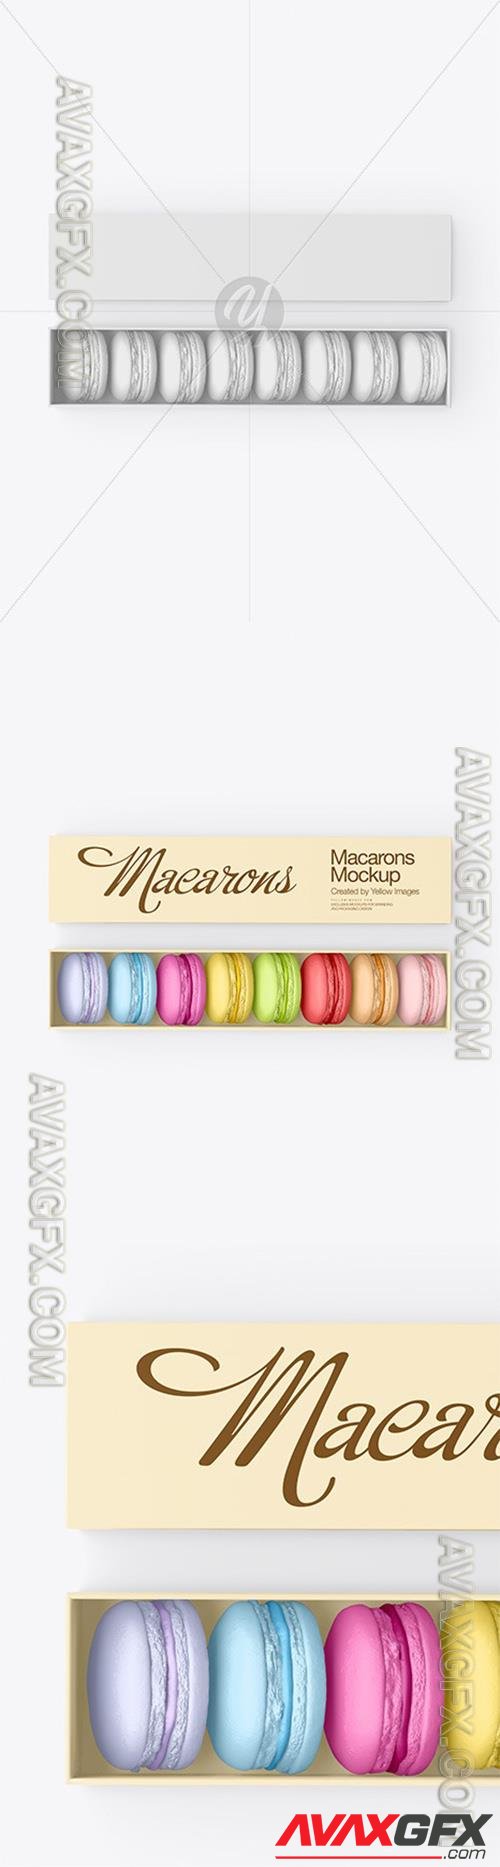 Opened Paper Box With Macarons Mockup 65451 TIF